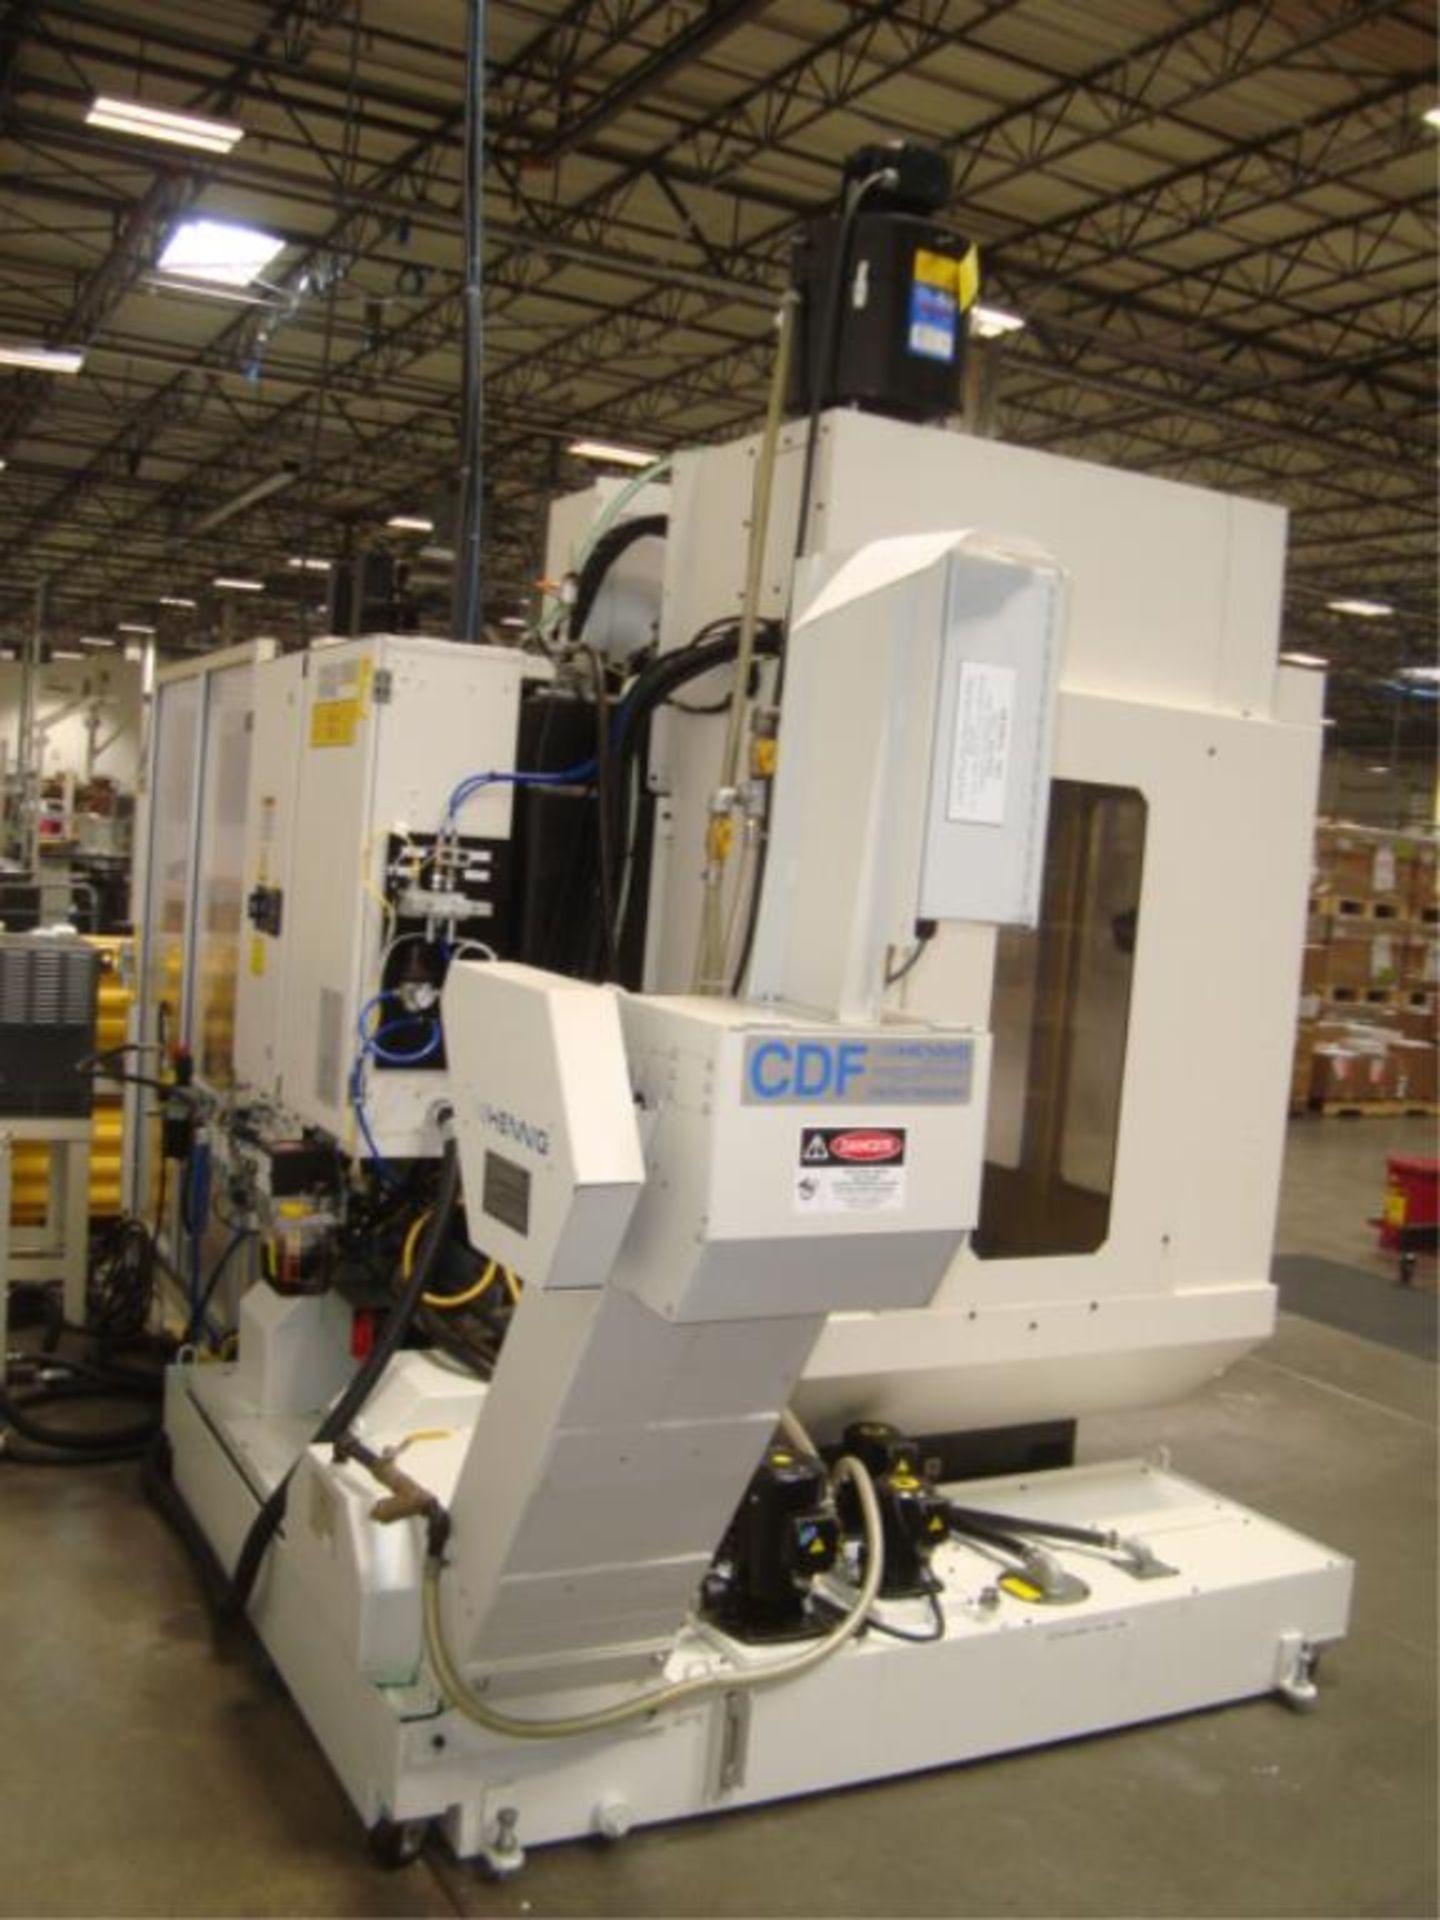 Fanuc Robodrill Alpha-D21MiA5 with Fanuc M-10iA 6-Axis Robot - Image 22 of 60